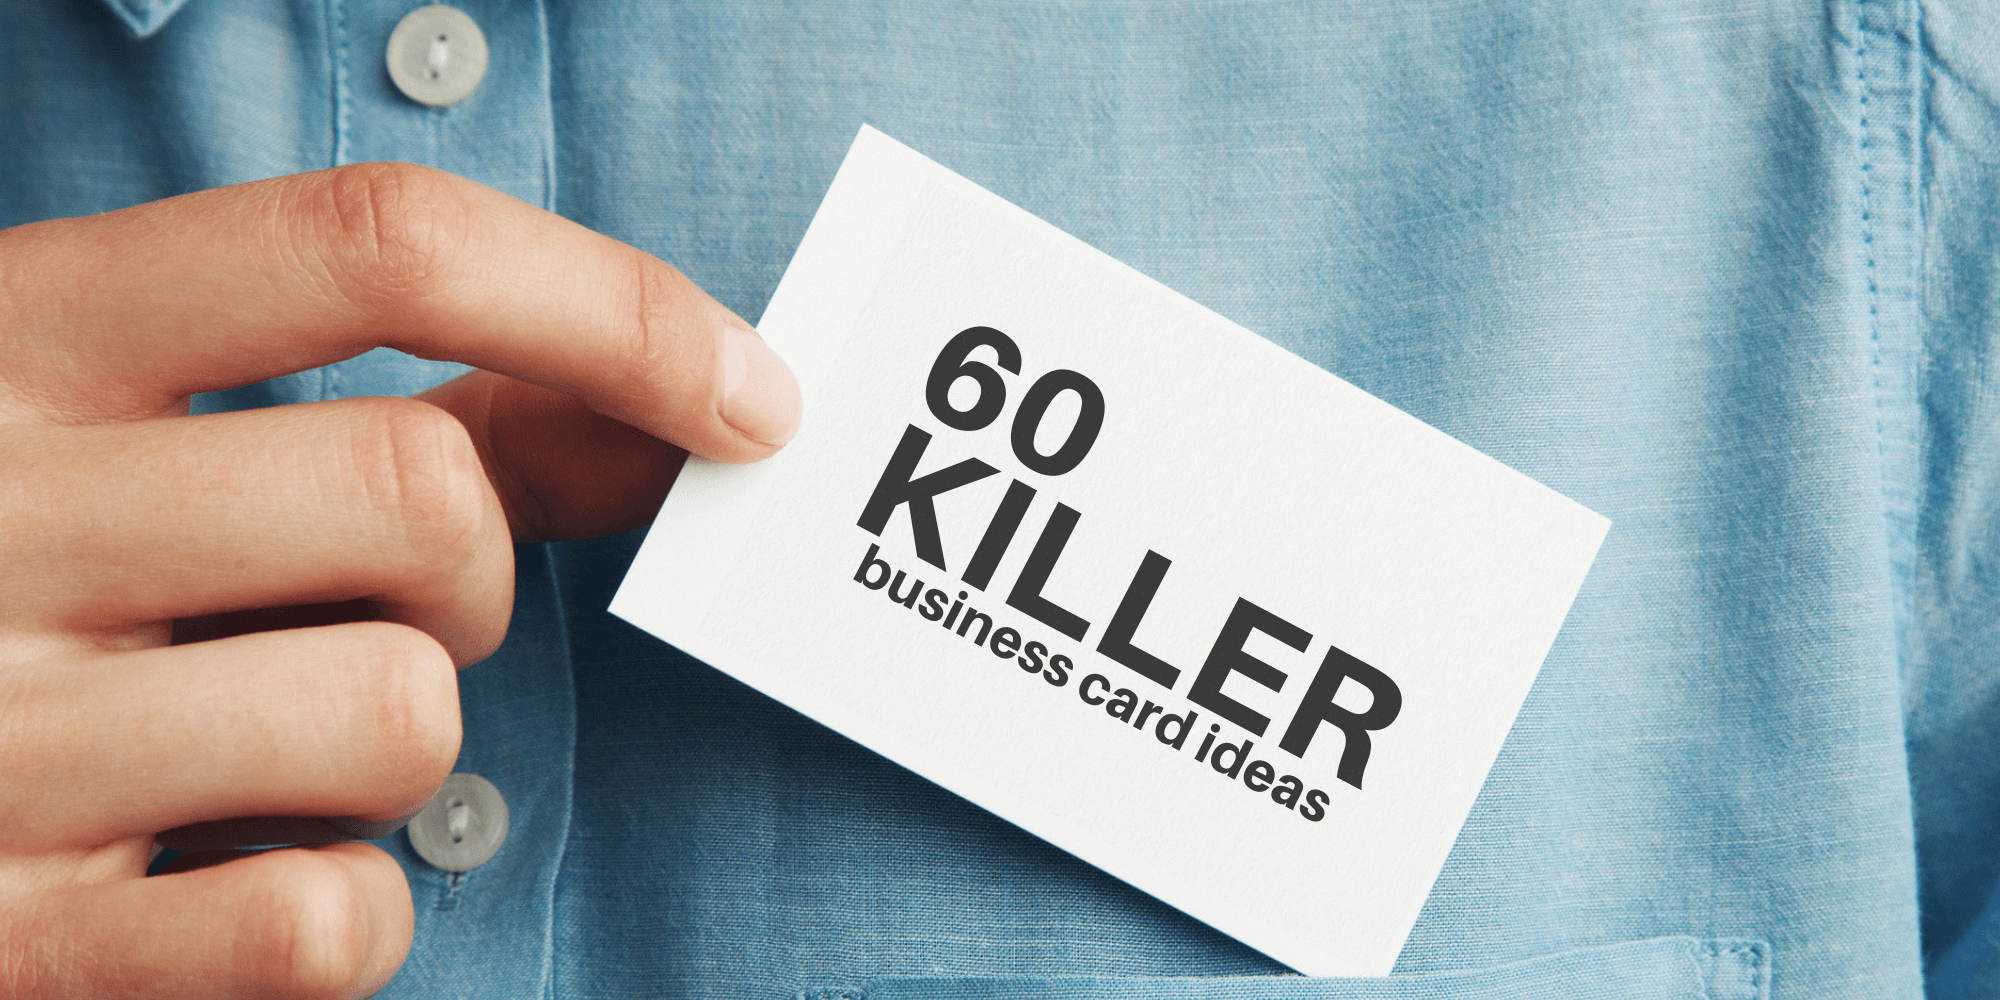 60 Modern Business Cards To Make A Killer First Impression With Qr Code Business Card Template